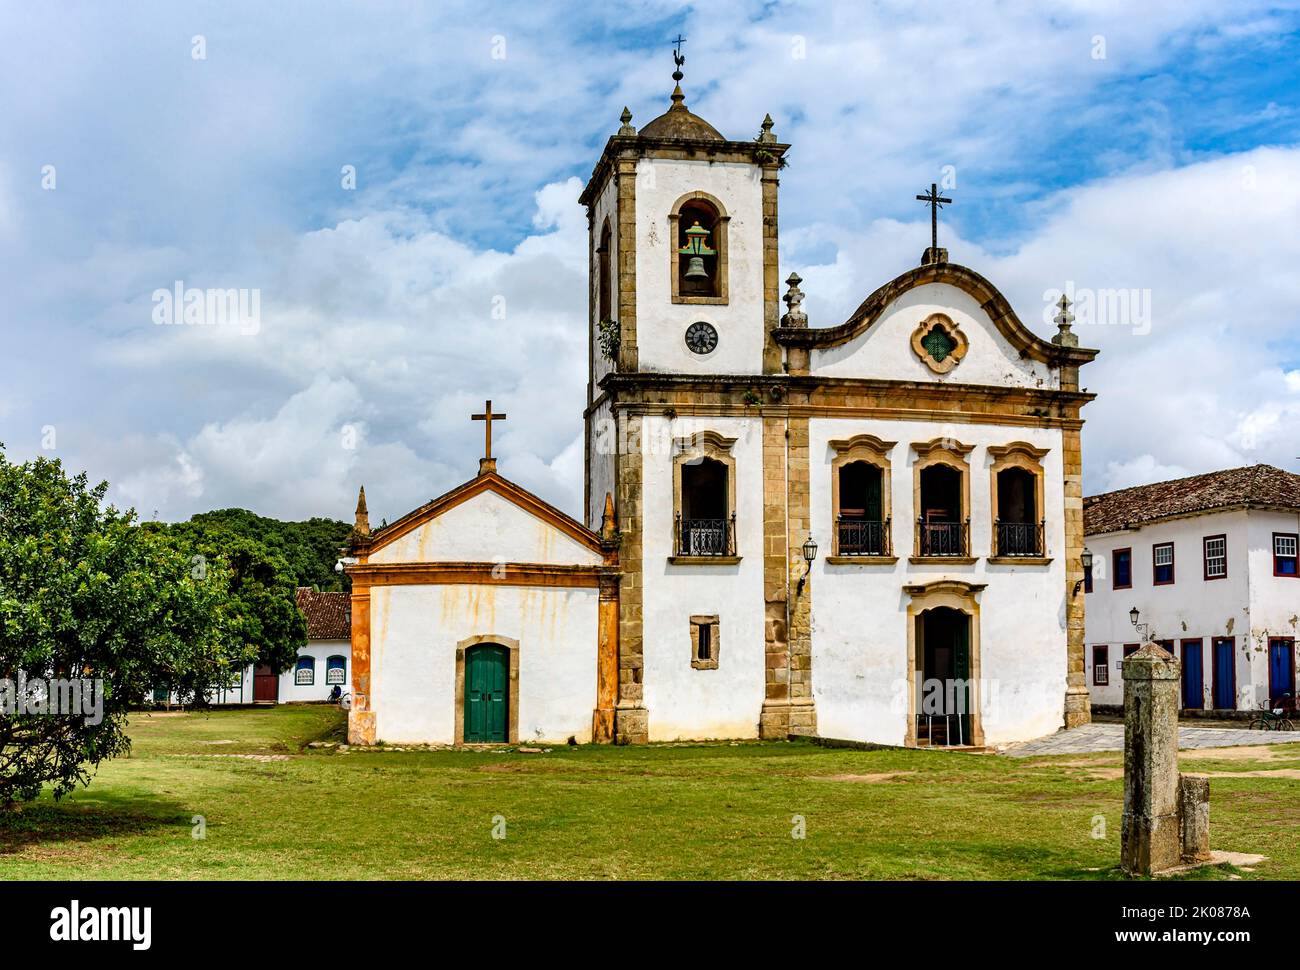 Old historic church surrounded by colonial houses in the famous and bucolic city of Paraty on the coast of Rio de Janeiro Stock Photo